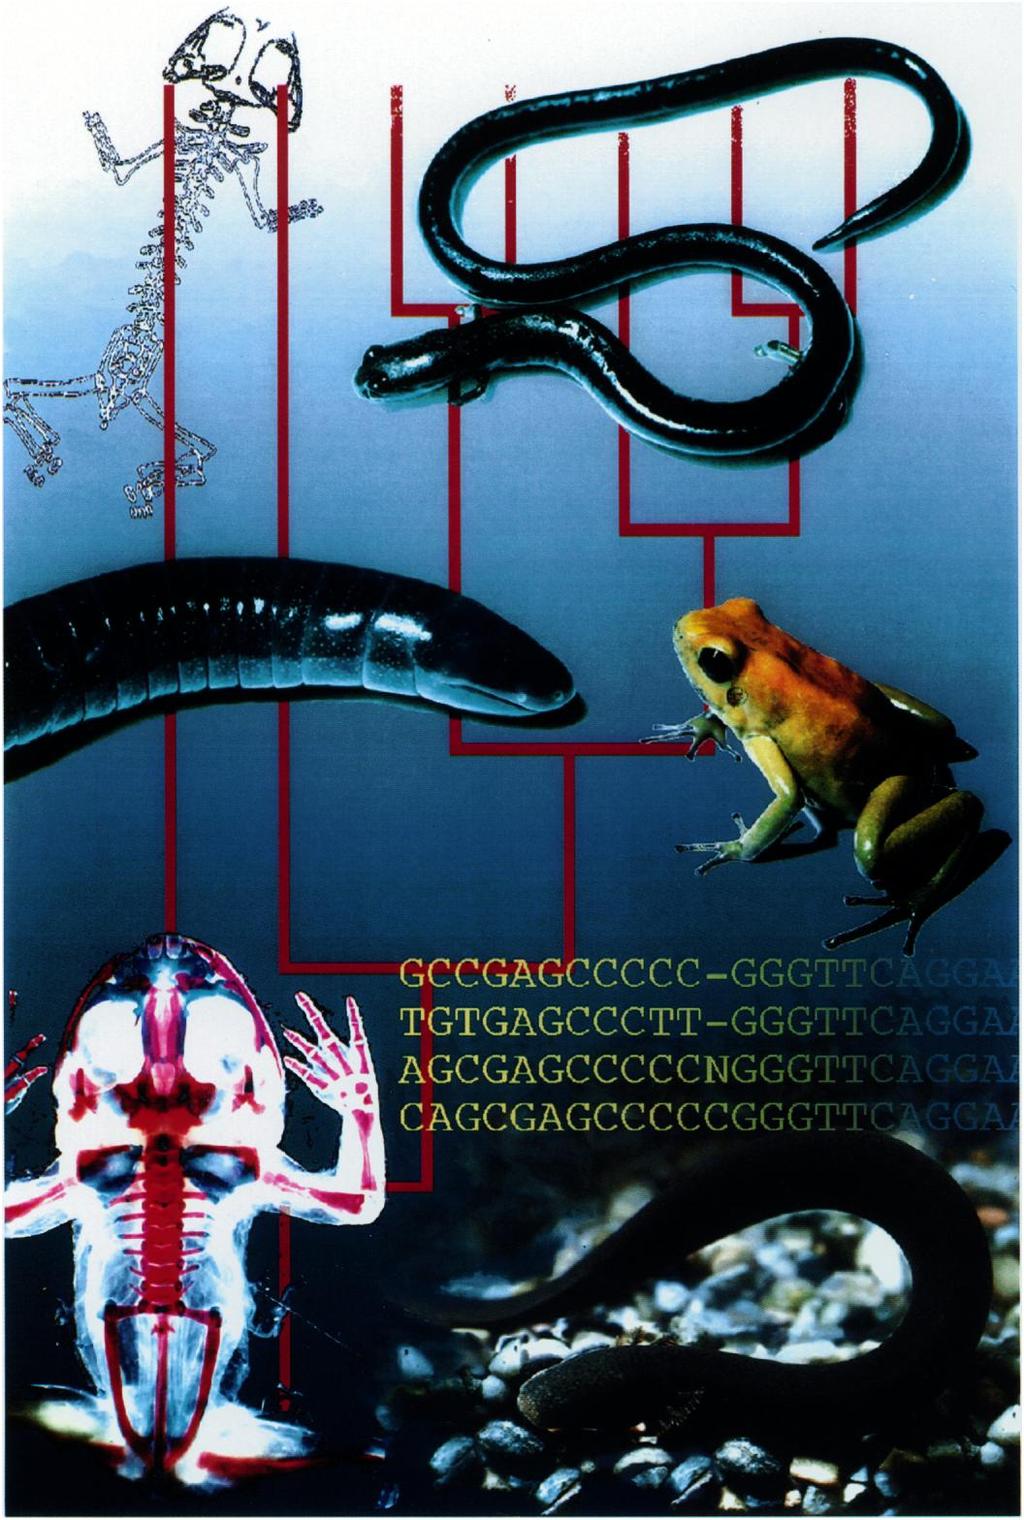 1 1 I I p A 1 This volume contains papers presented in the symposium "Amphibian relationships: Phylogenetic analysis of morphology and molecules",